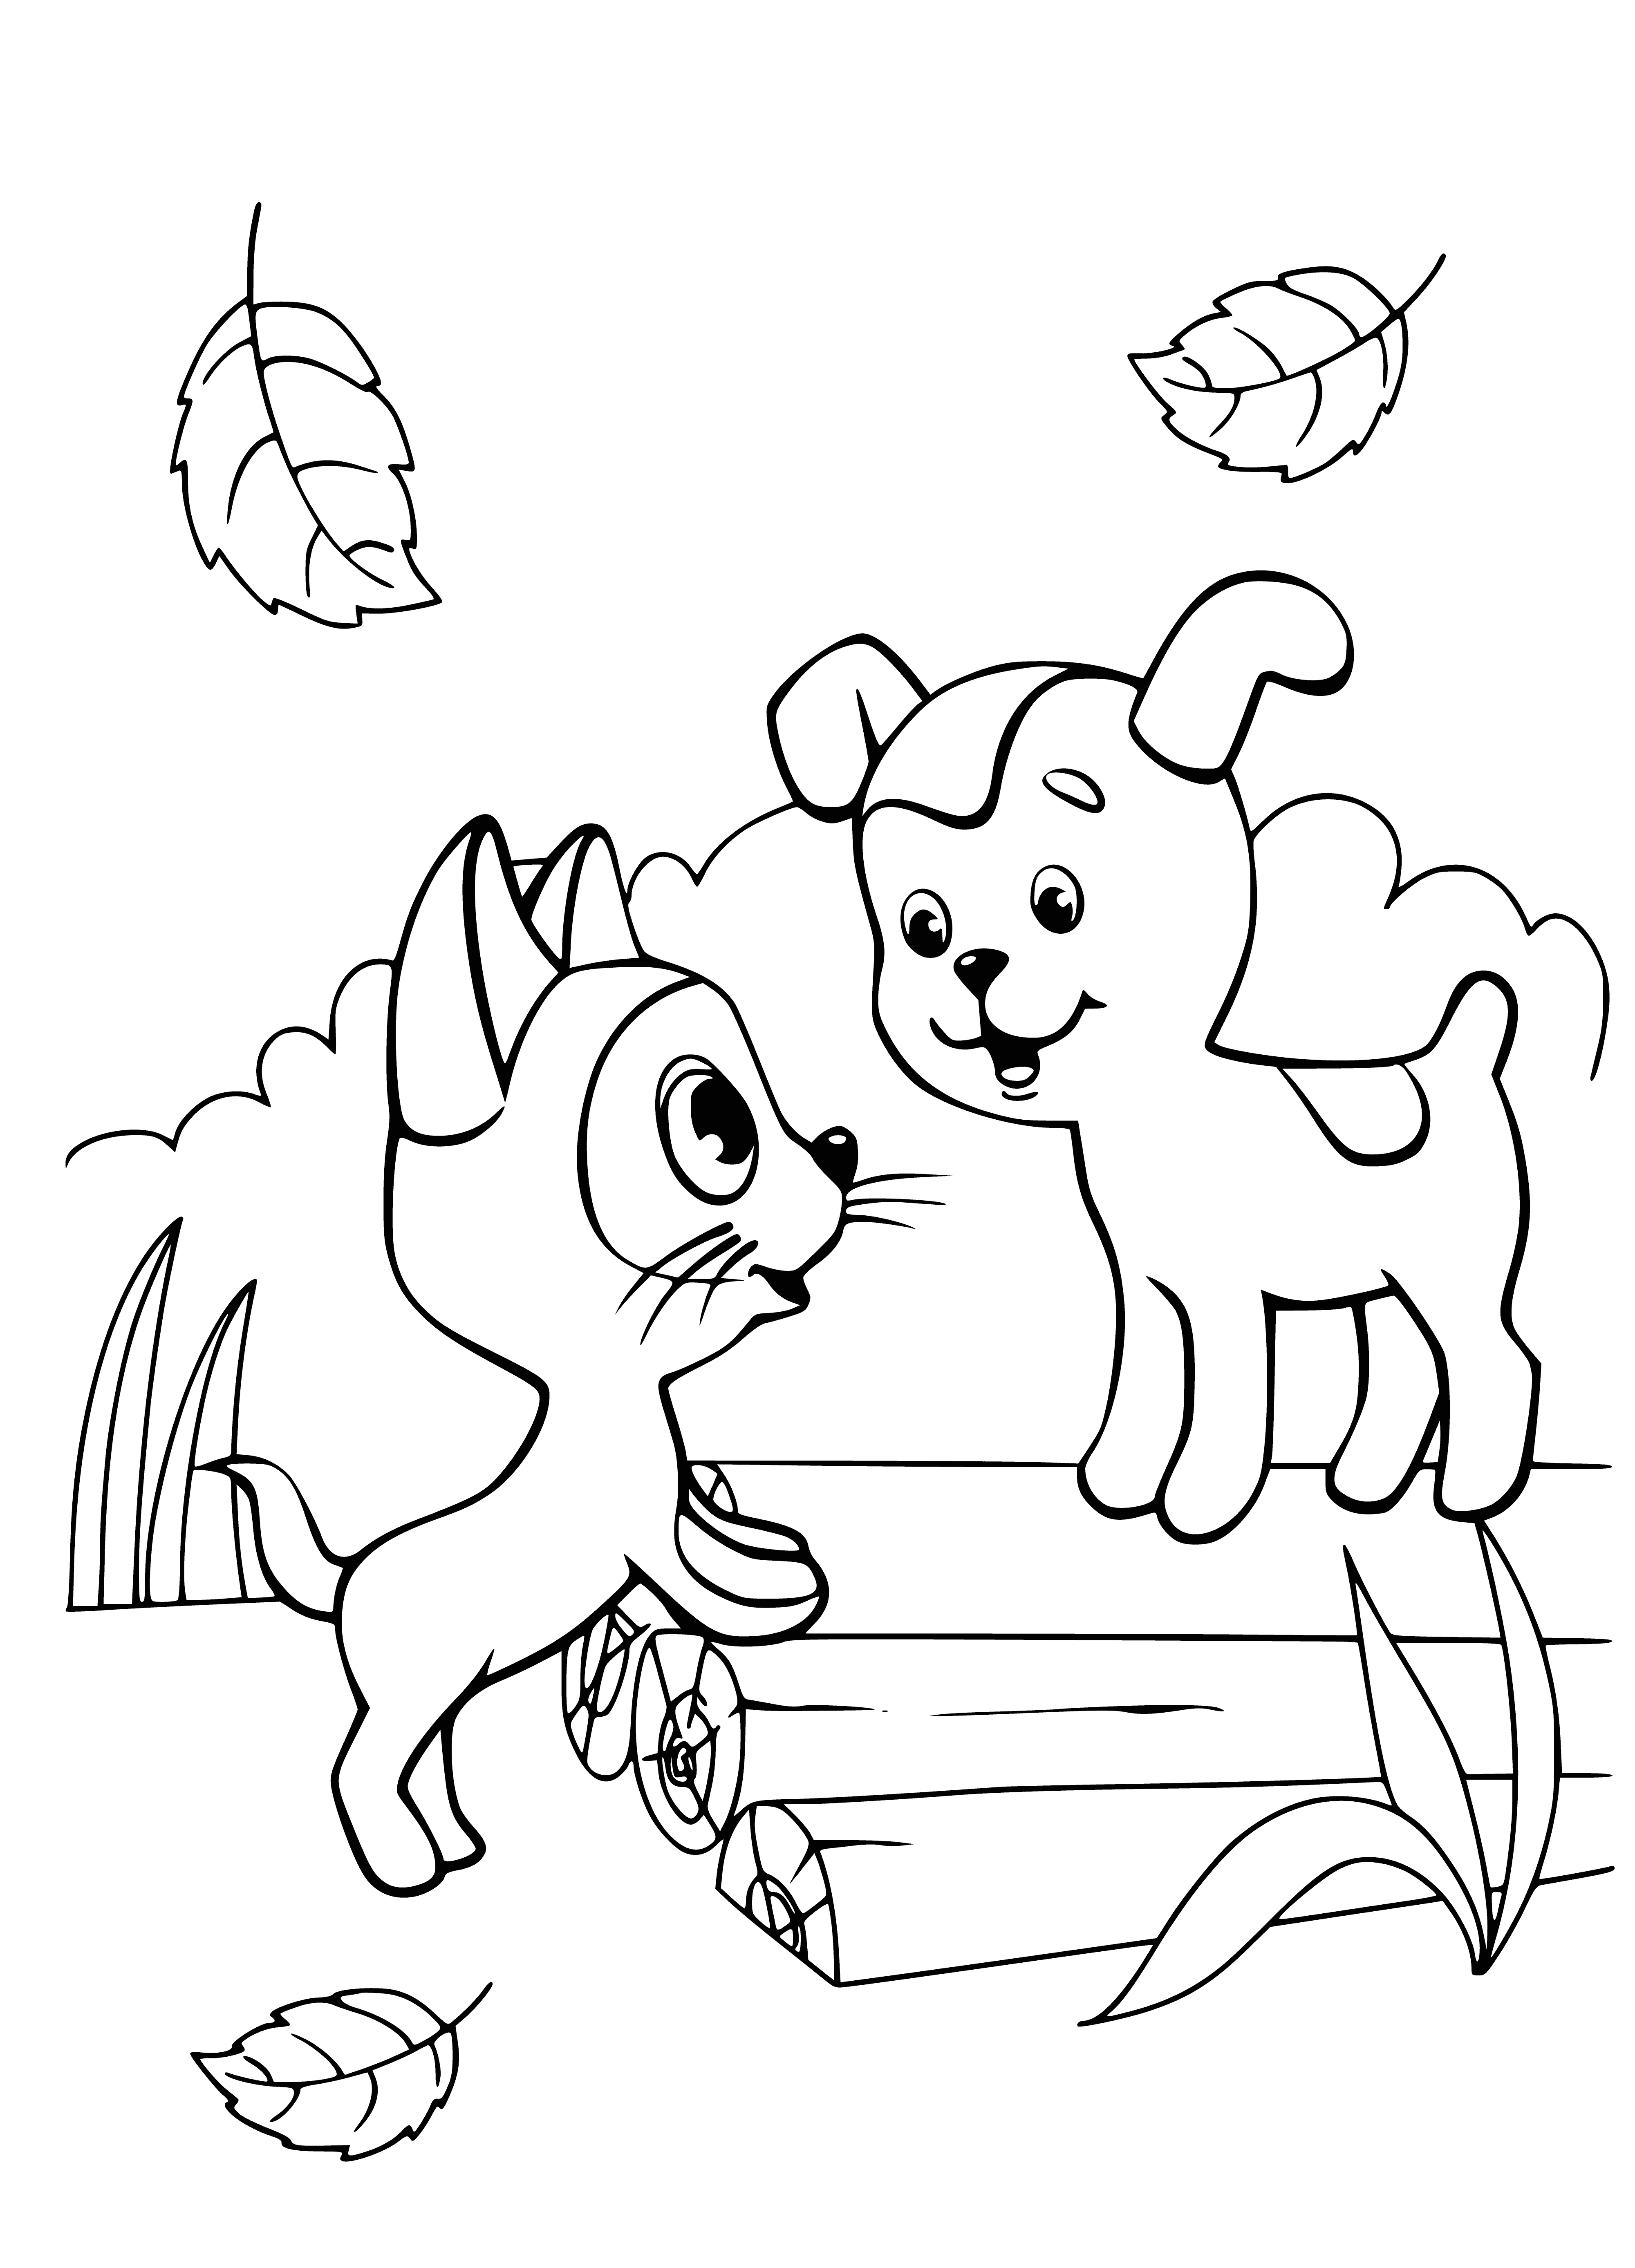 coloring page: Kitten Woof and puppy Sharik sit facing each other, Woof open-mouthed, ready to speak.